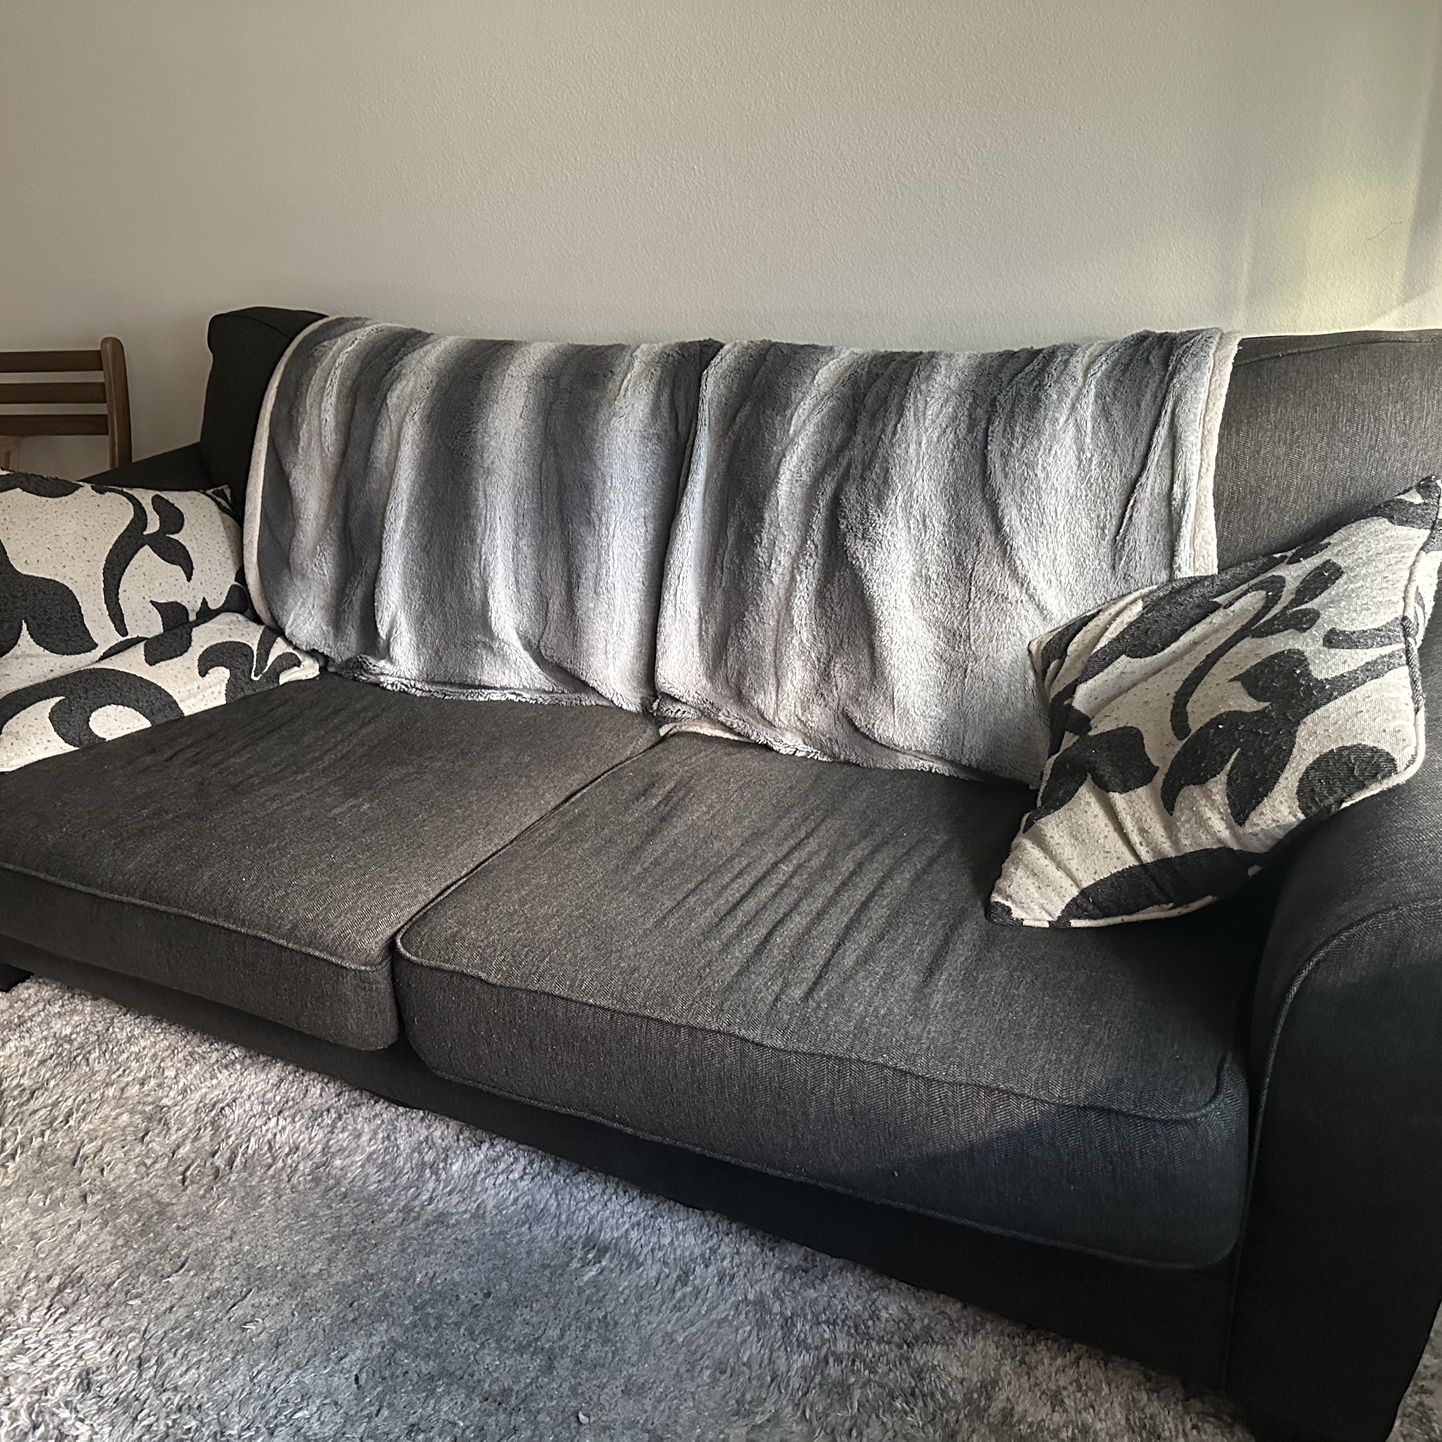 GREAT Condition Black Couch